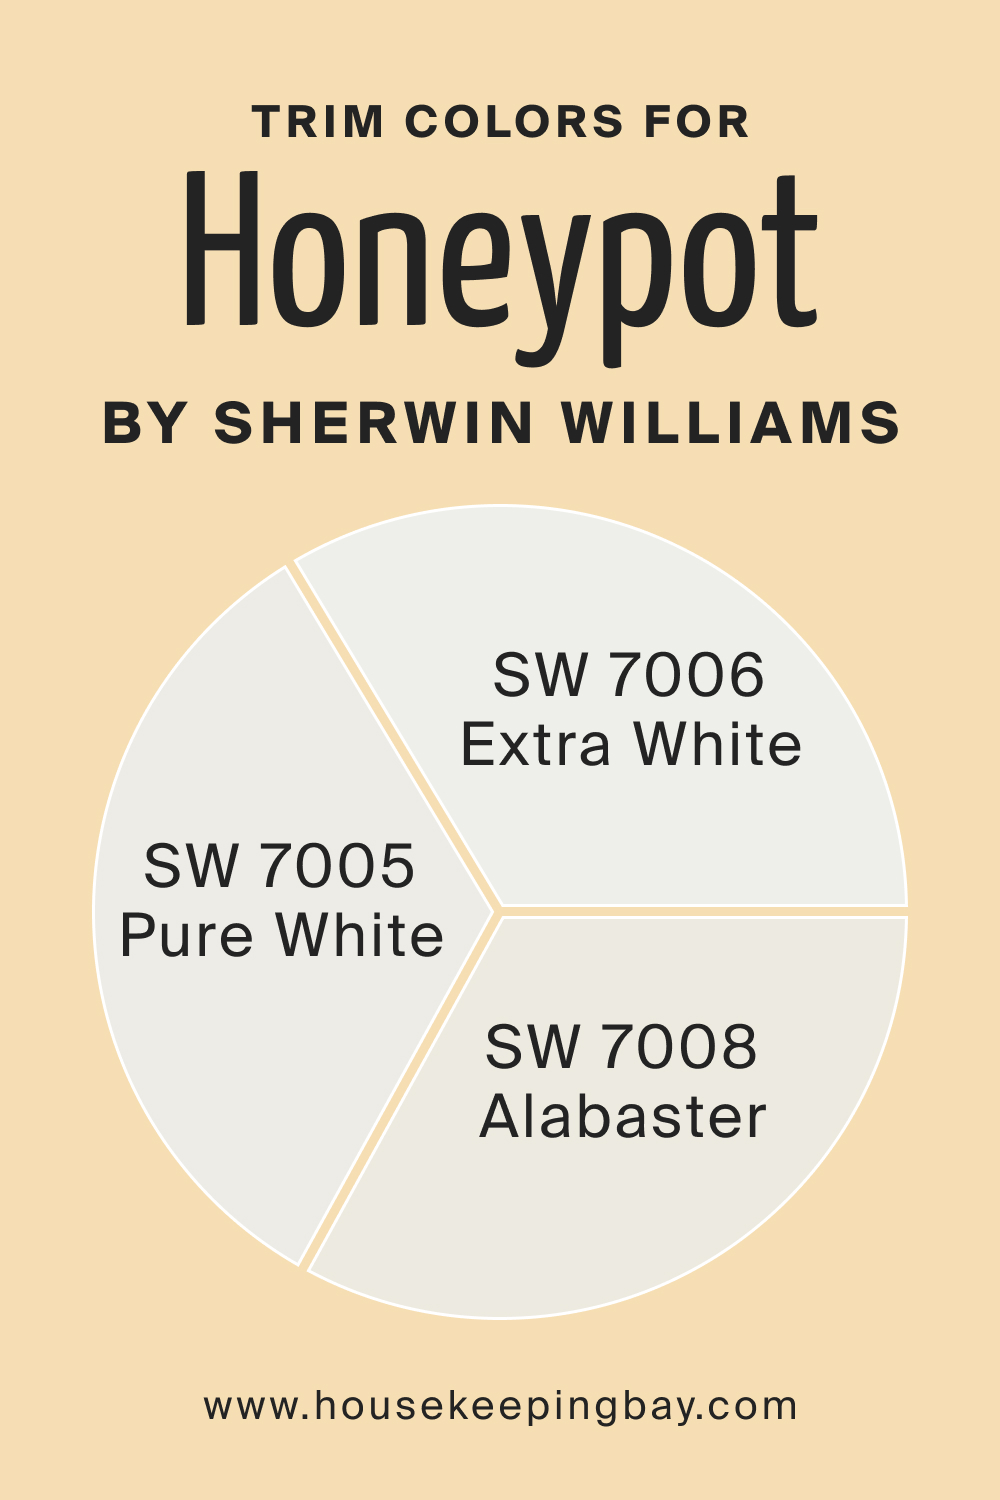 Trim Colors of SW 9663 Honeypot by Sherwin Williams